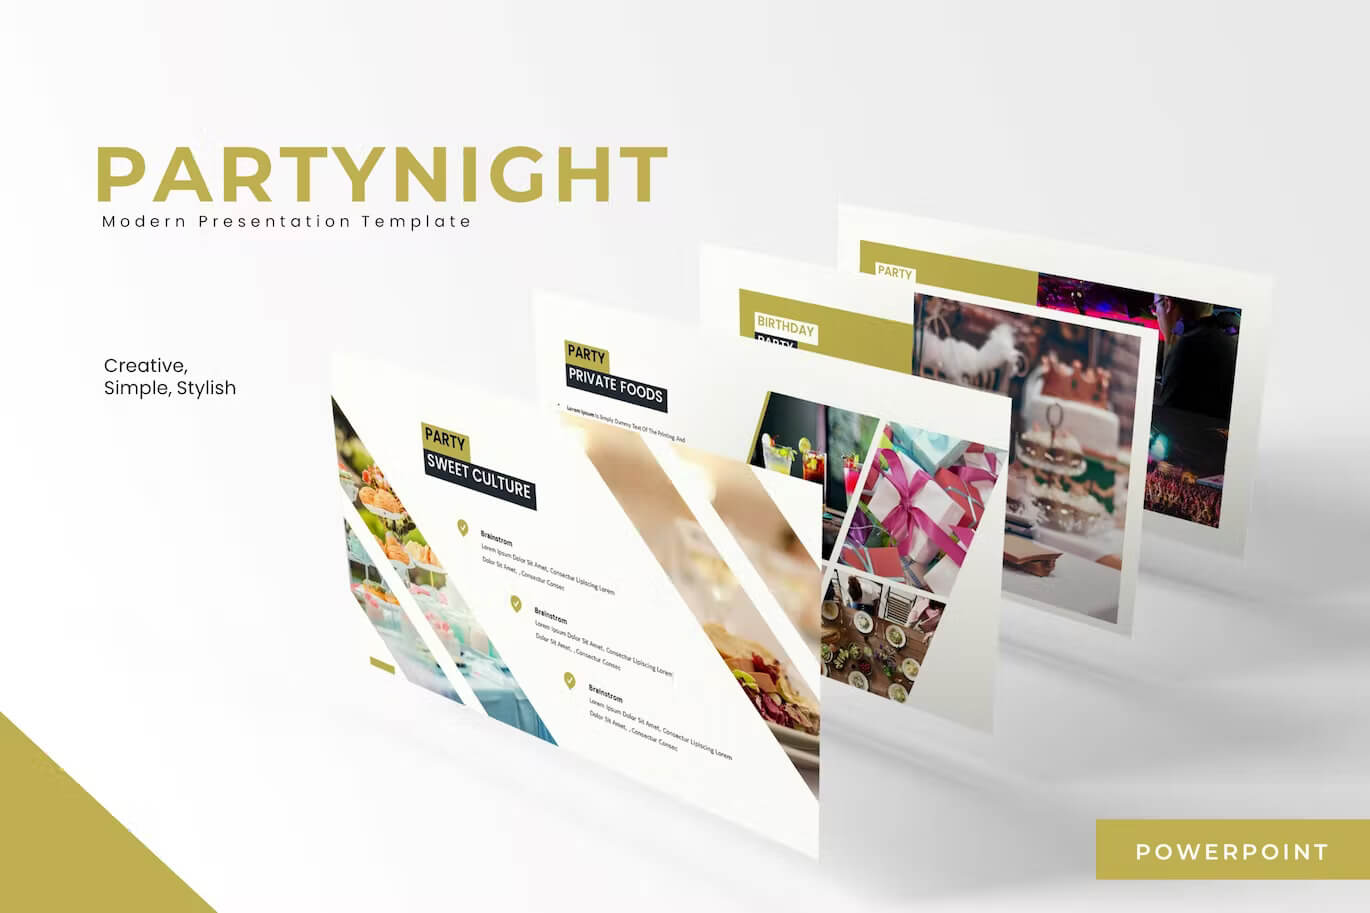 Sweet culture and private foods of Partynight presentation template.